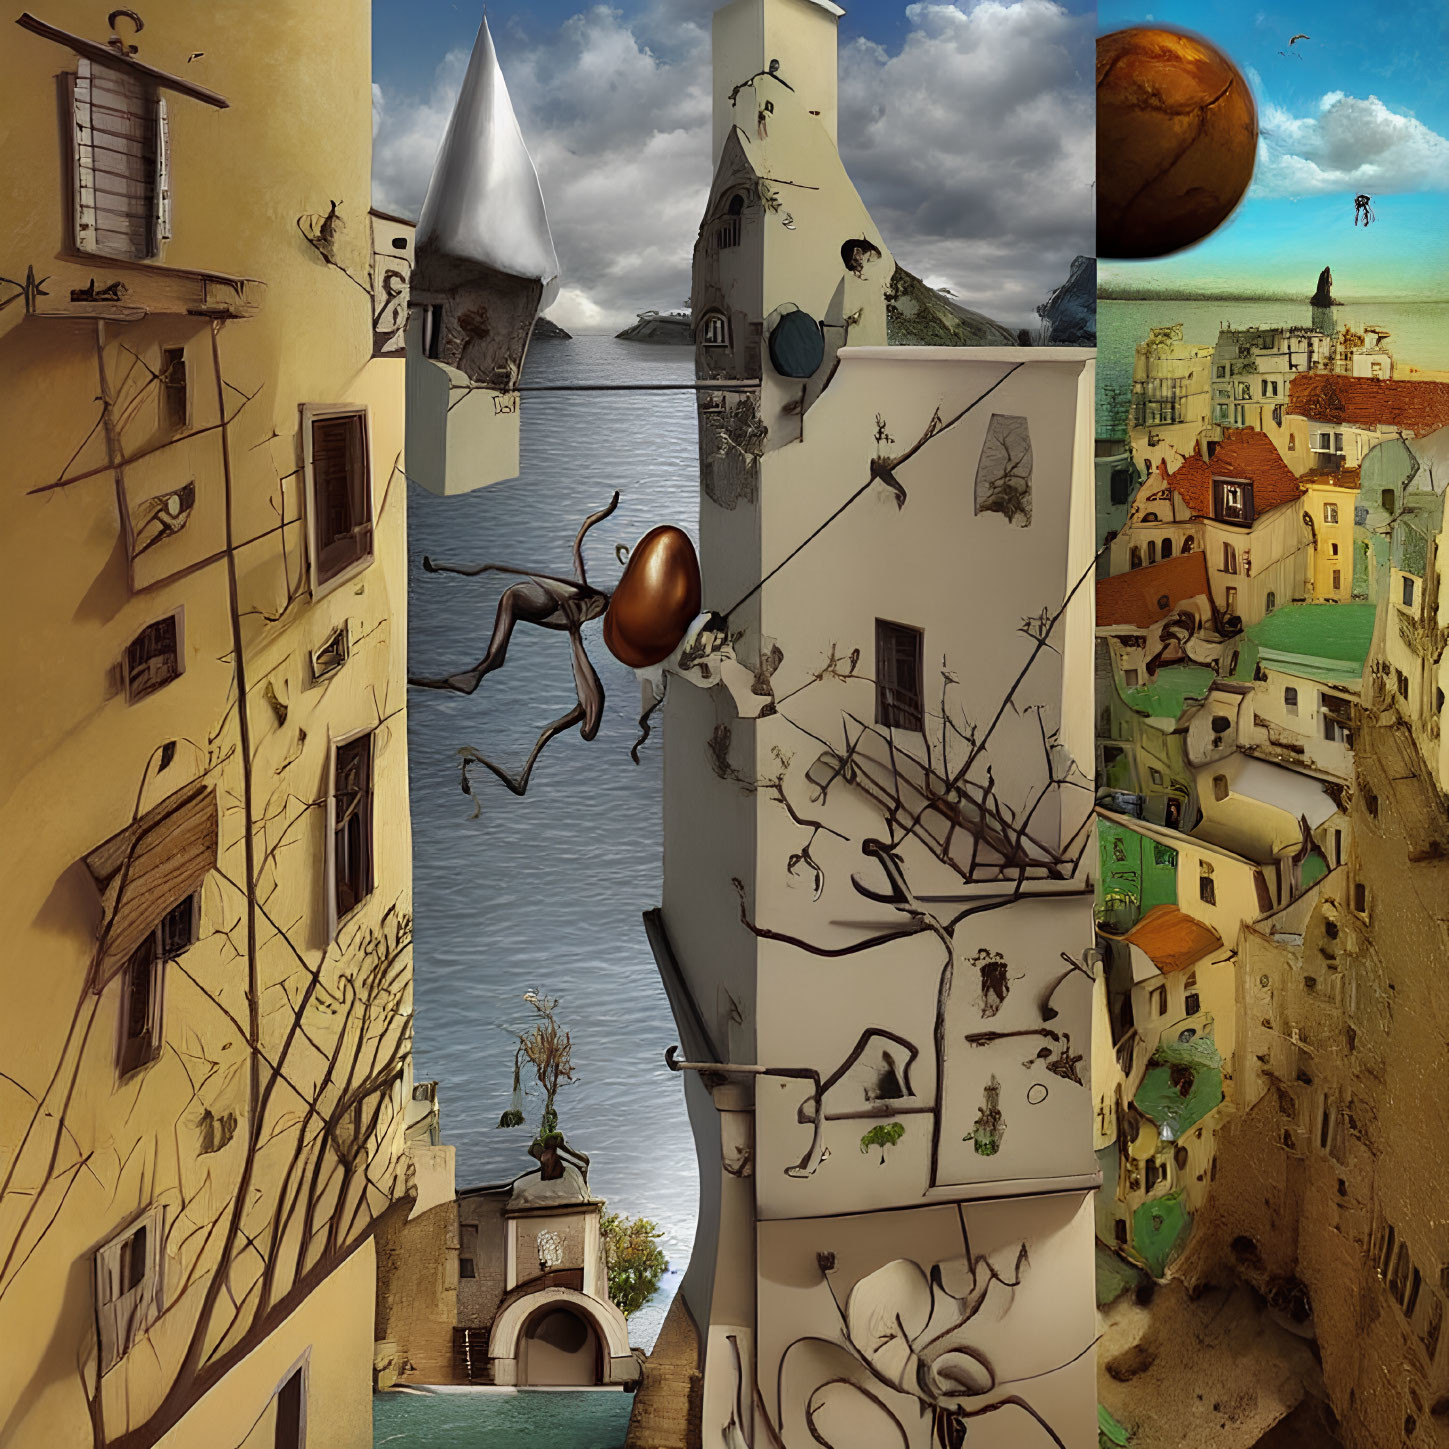 Surreal cityscape collage with ant, paper boat, whimsical architecture & multiple planets